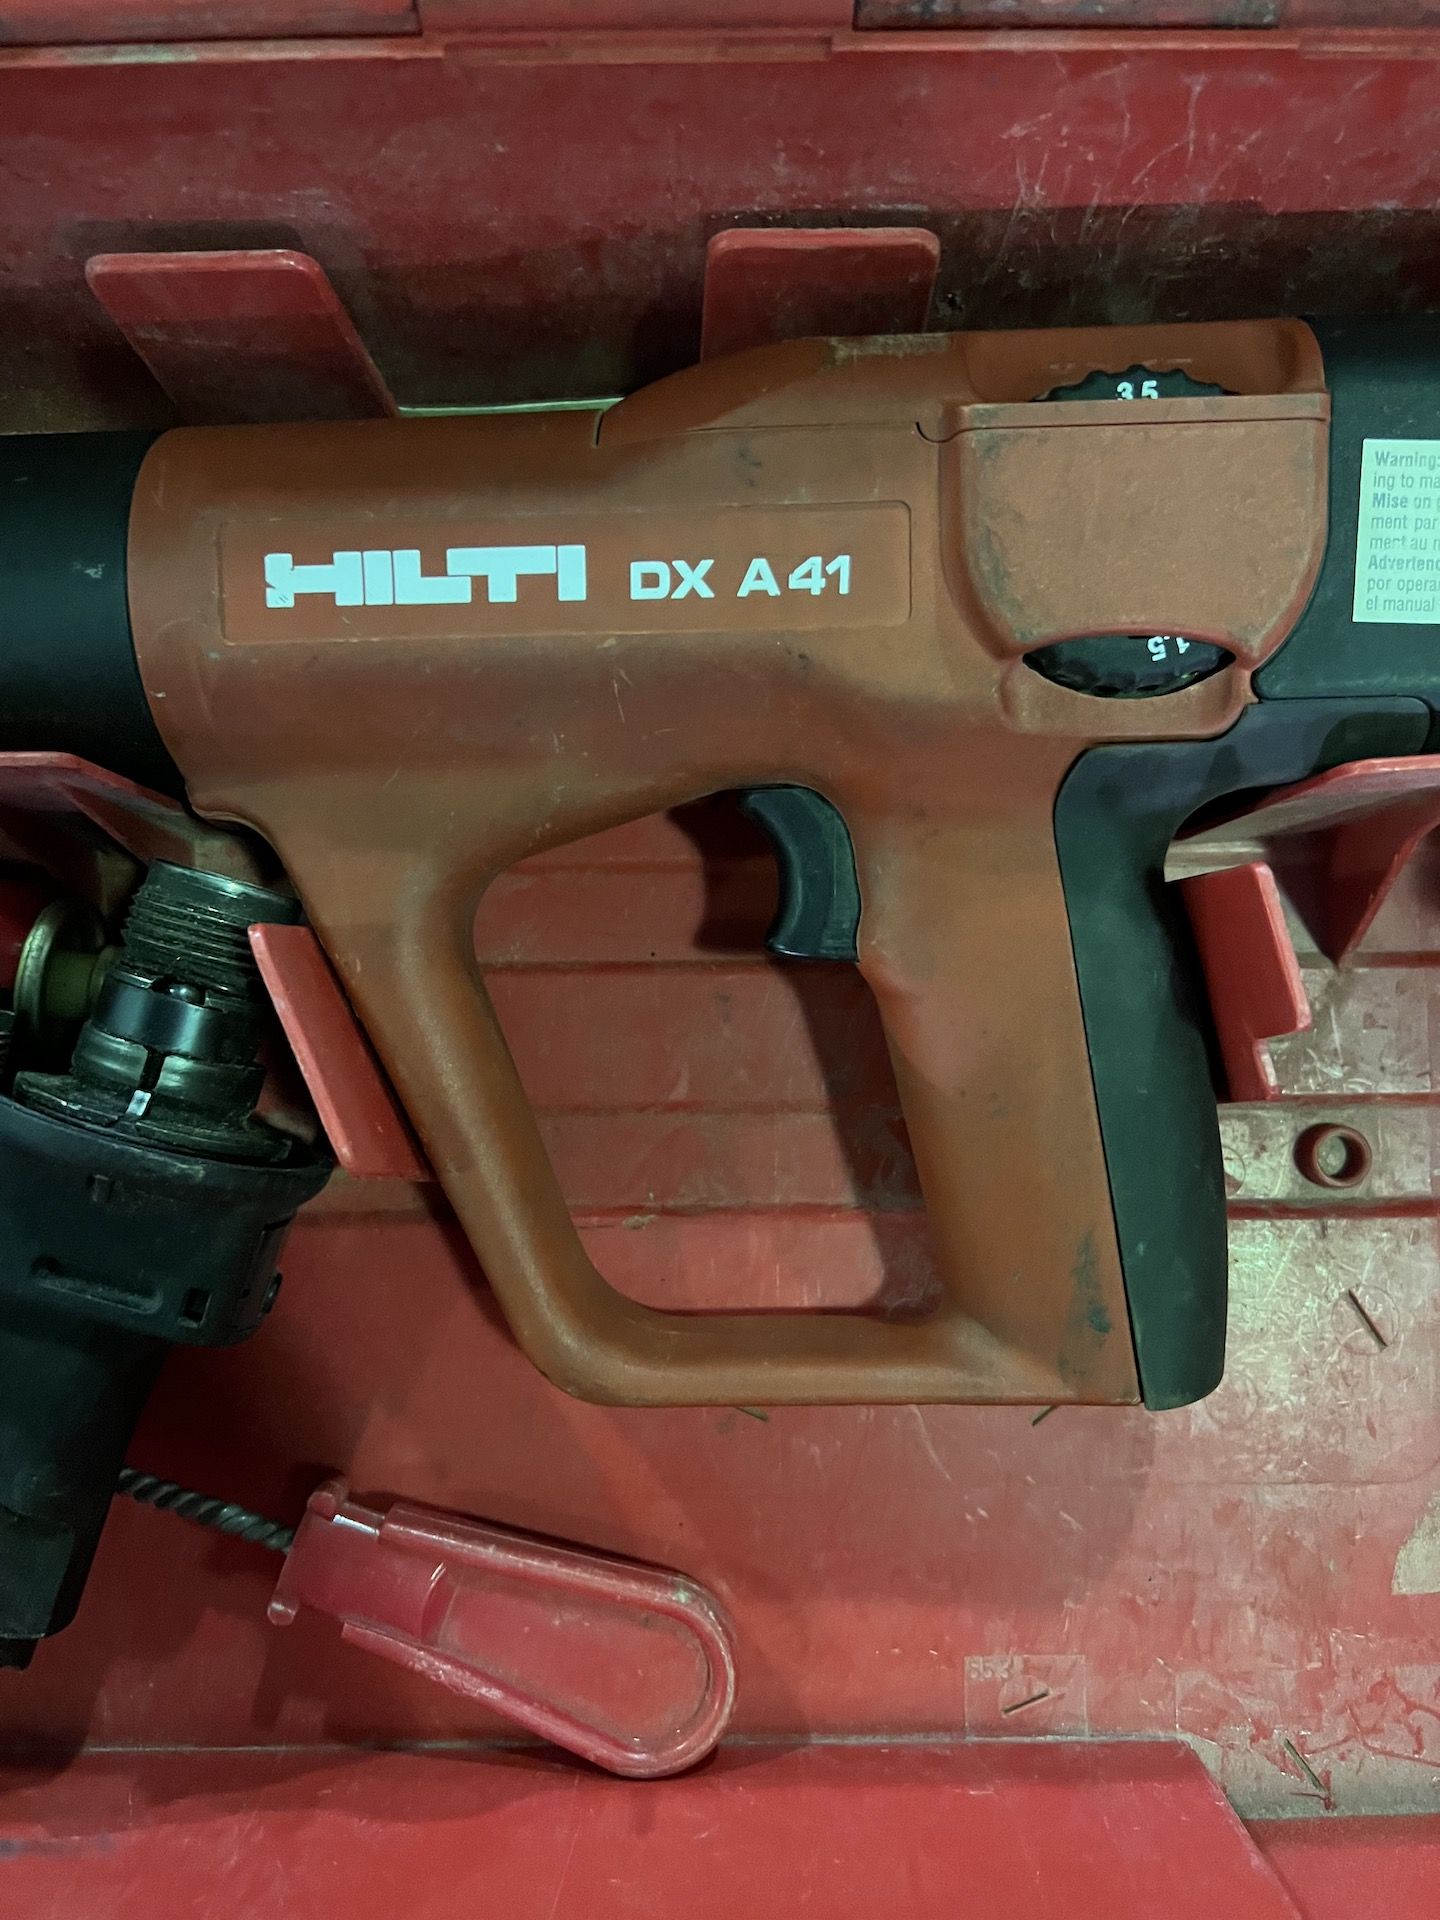 HILTI DX A41 POWDER ACTUATED NAIL GUN WITH X-1M72 MAGAZINE - Image 6 of 13